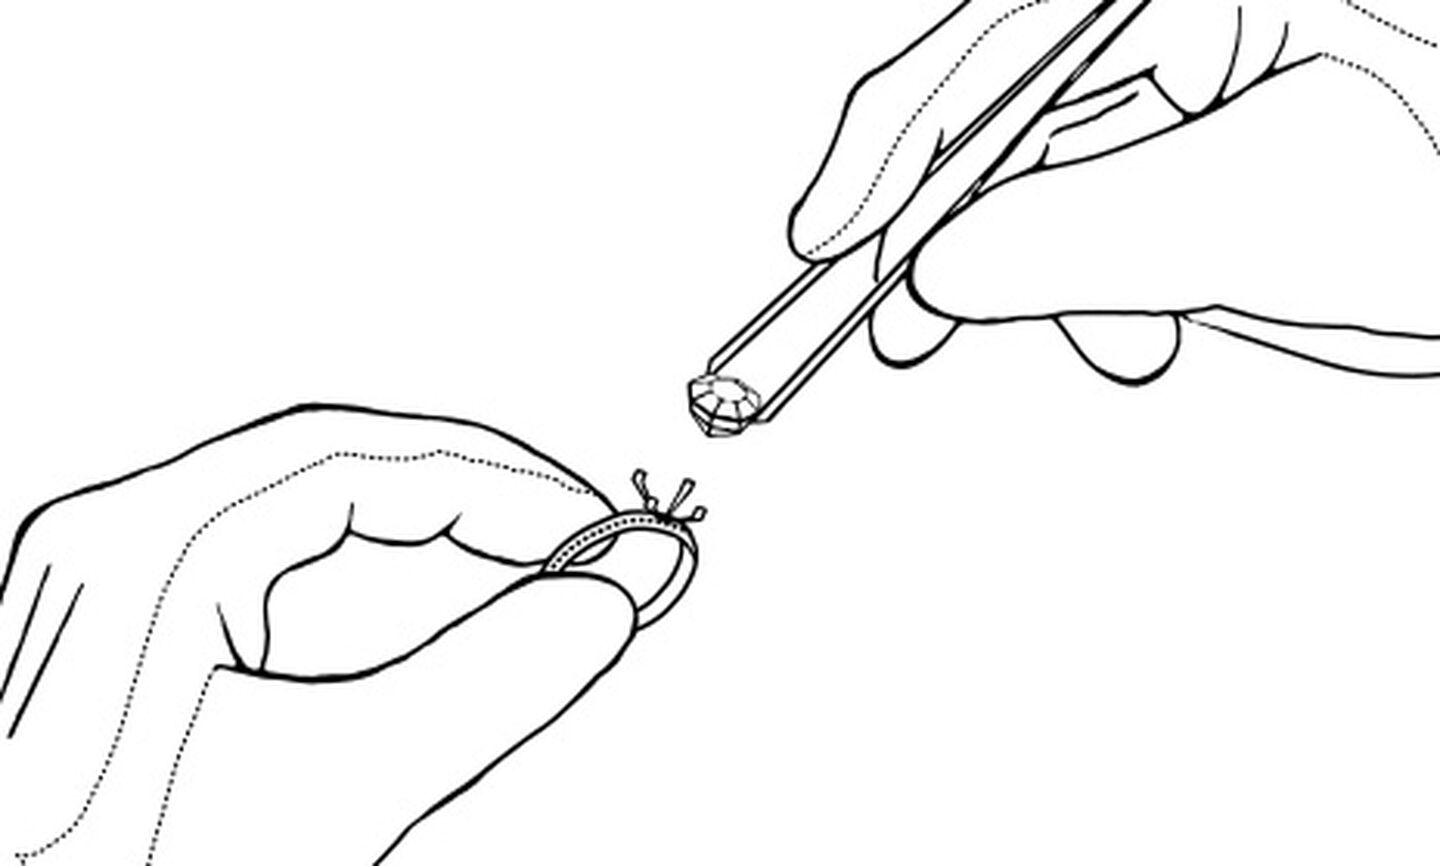 An illustration of a hand creating an engagement ring.